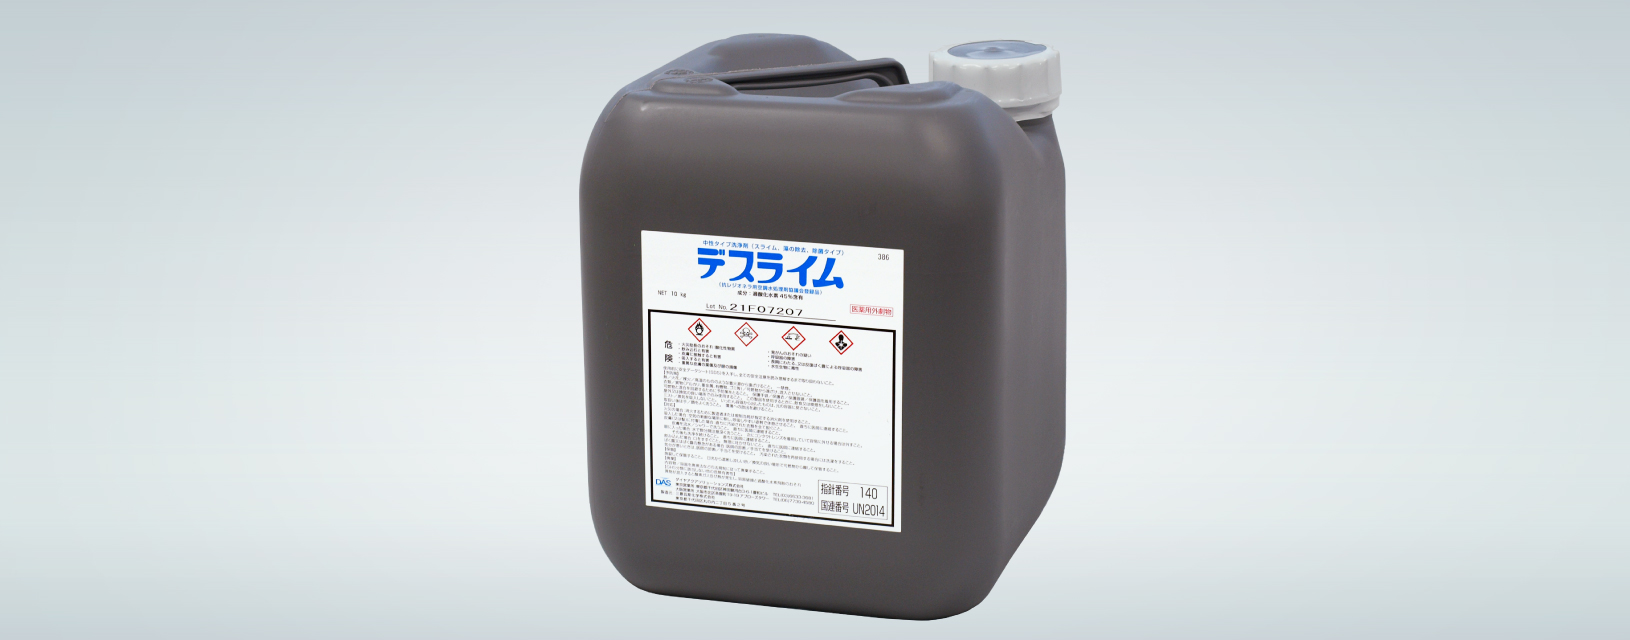 photo: Cleaning agent for air conditioning equipment “DESLIME”